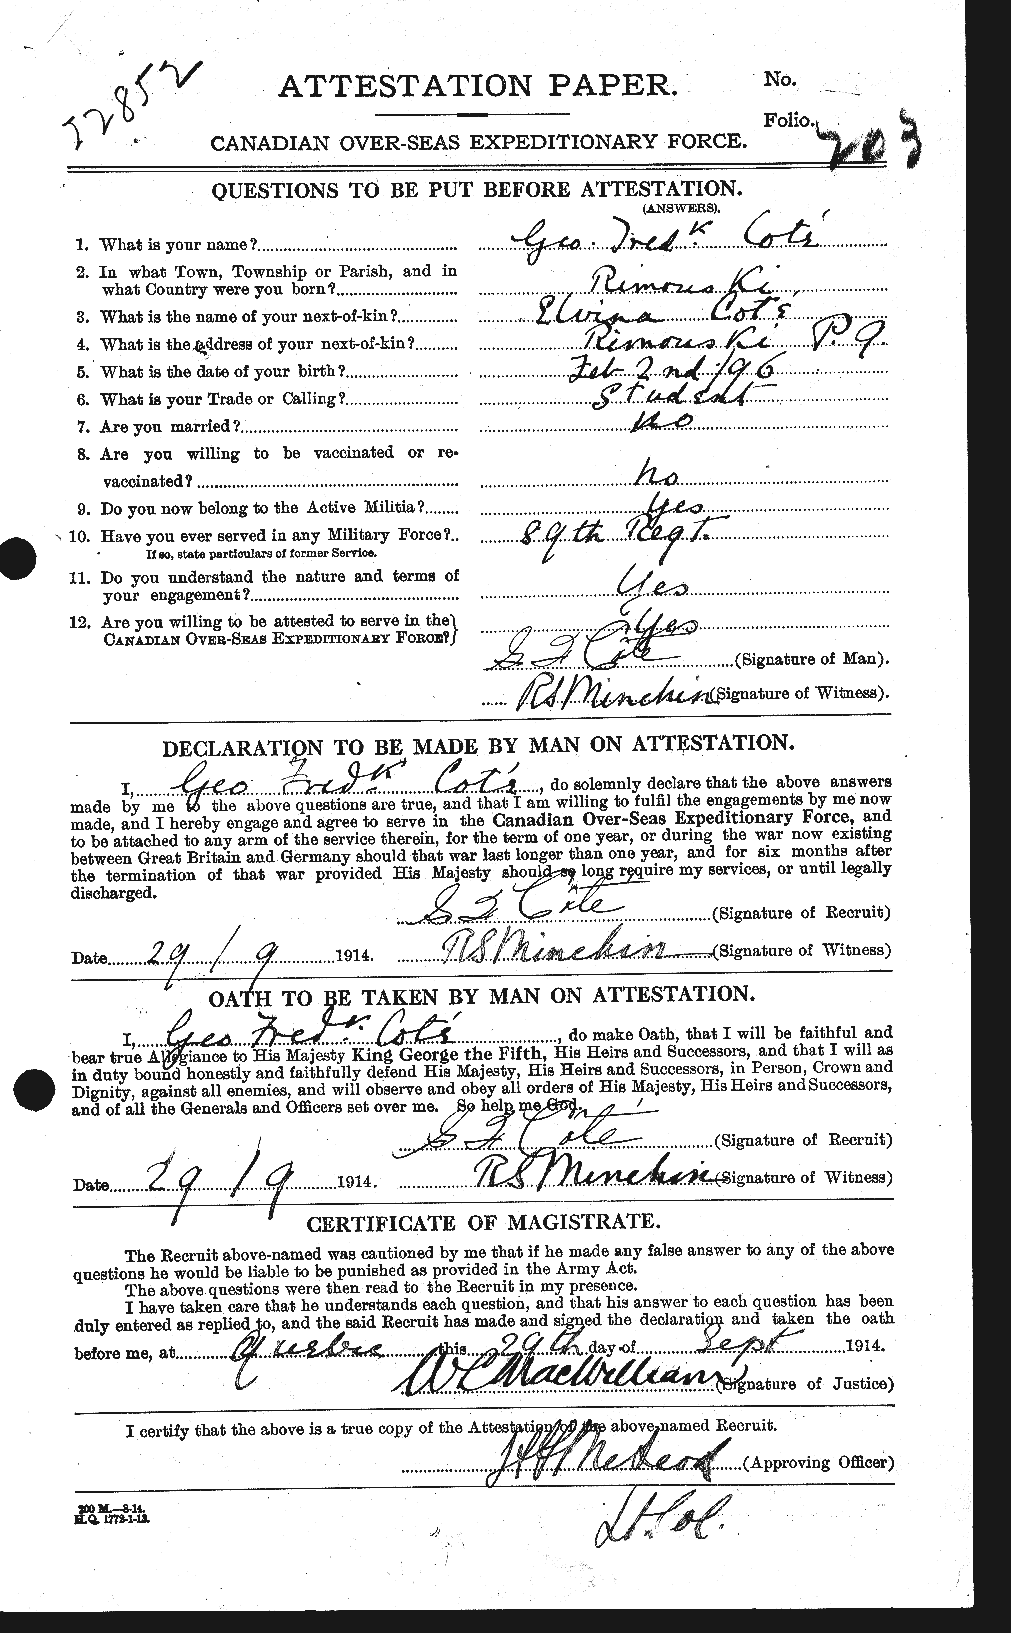 Personnel Records of the First World War - CEF 058450a